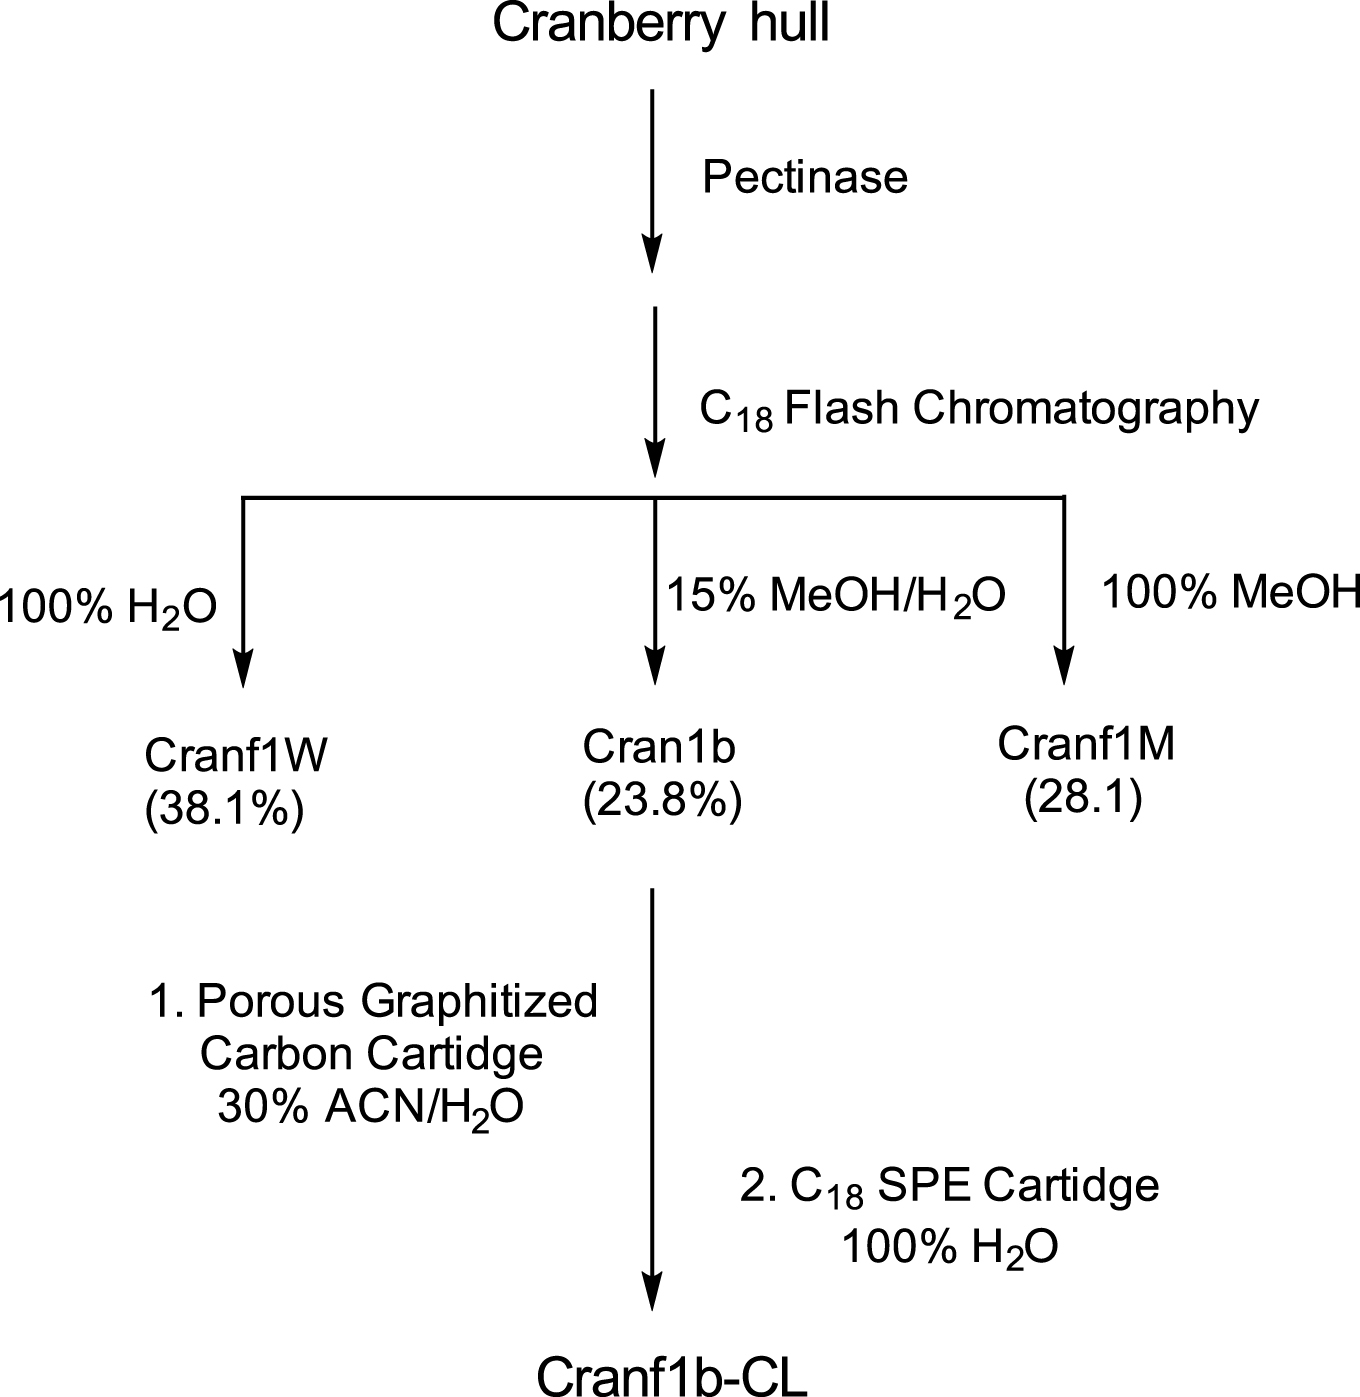 Fractionation and purification of cranberry materials.